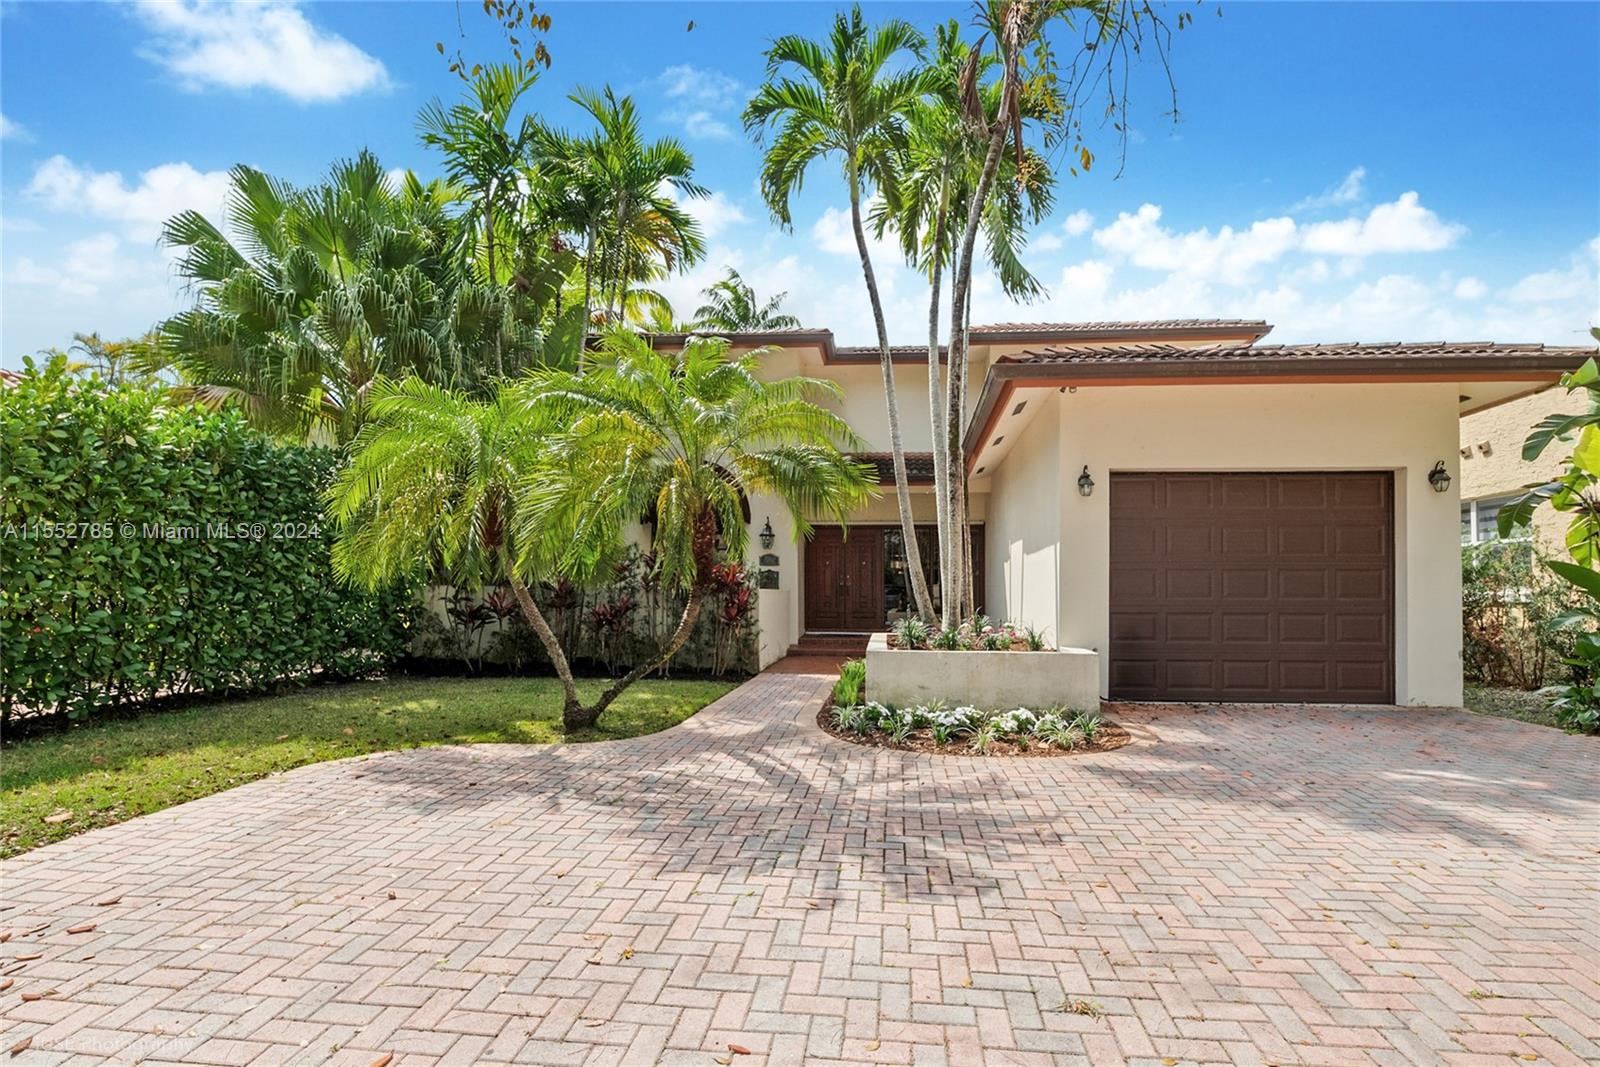 Property for Sale at 516 Majorca Ave, Coral Gables, Broward County, Florida - Bedrooms: 3 
Bathrooms: 3  - $1,499,999